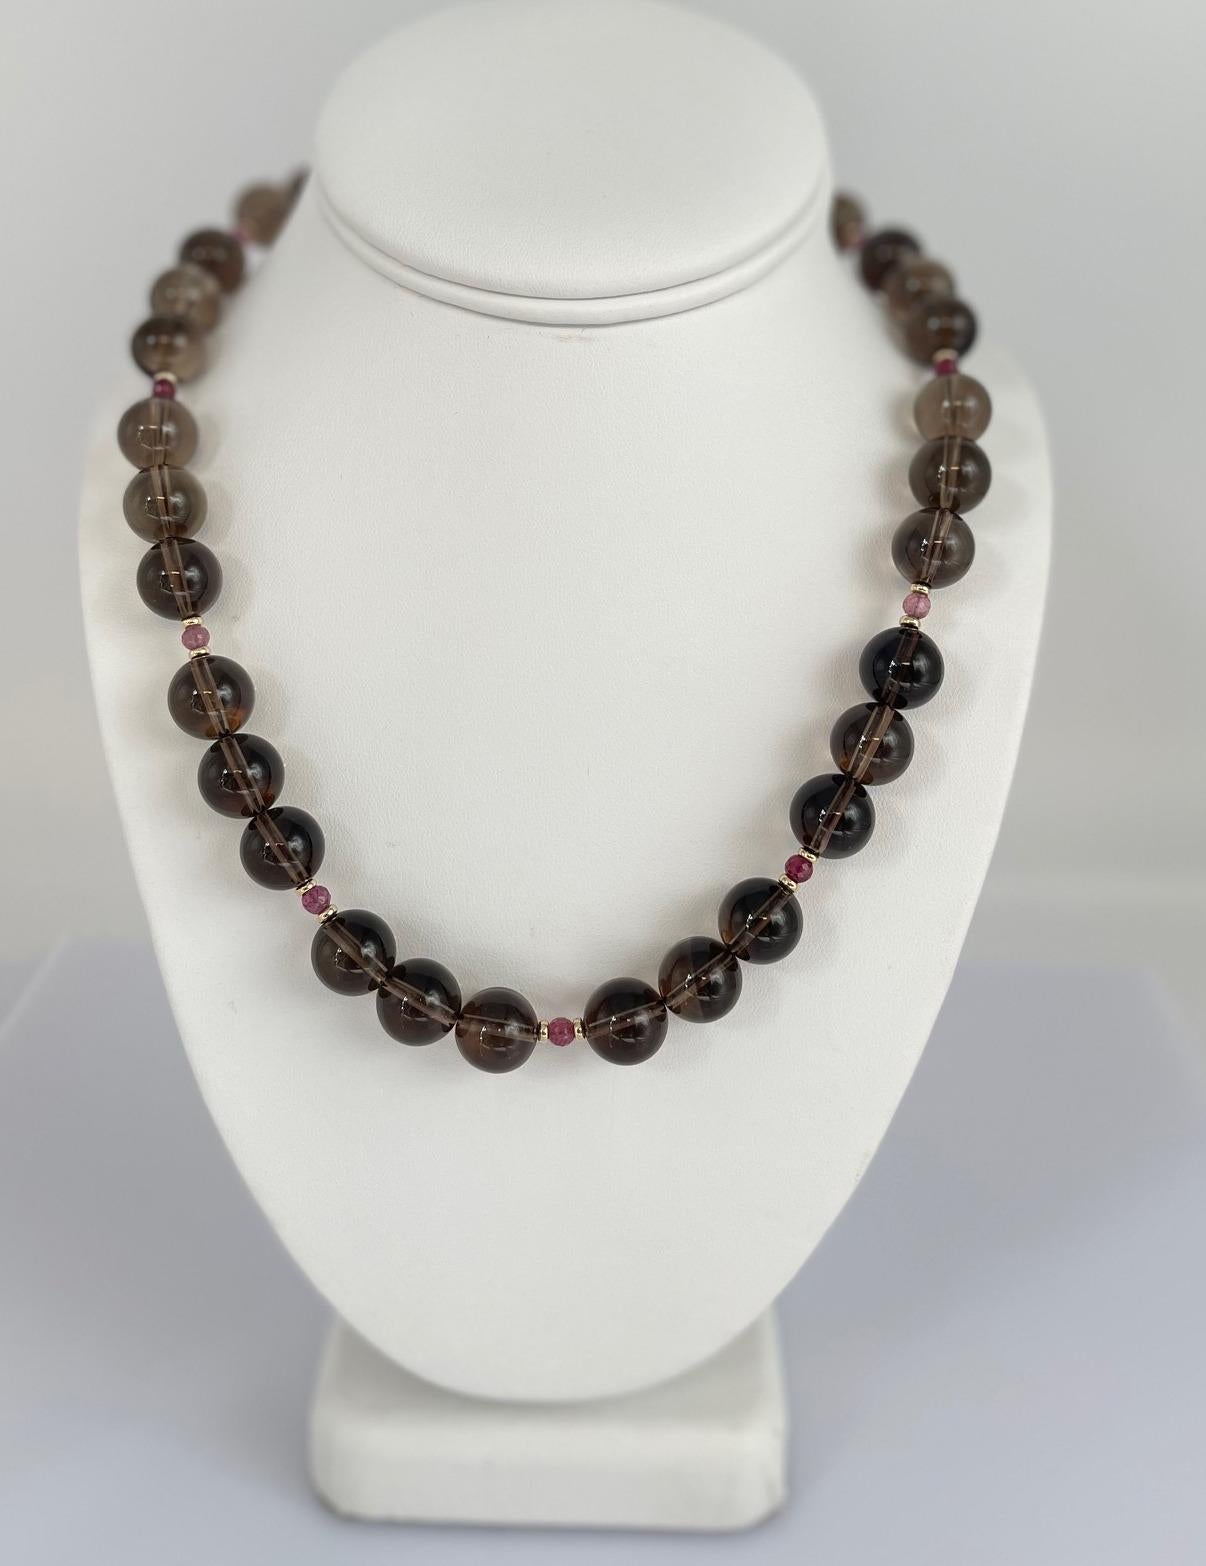 12mm Smoky Quartz and Pink Tourmaline Beaded Necklace with Yellow Gold Accents 2